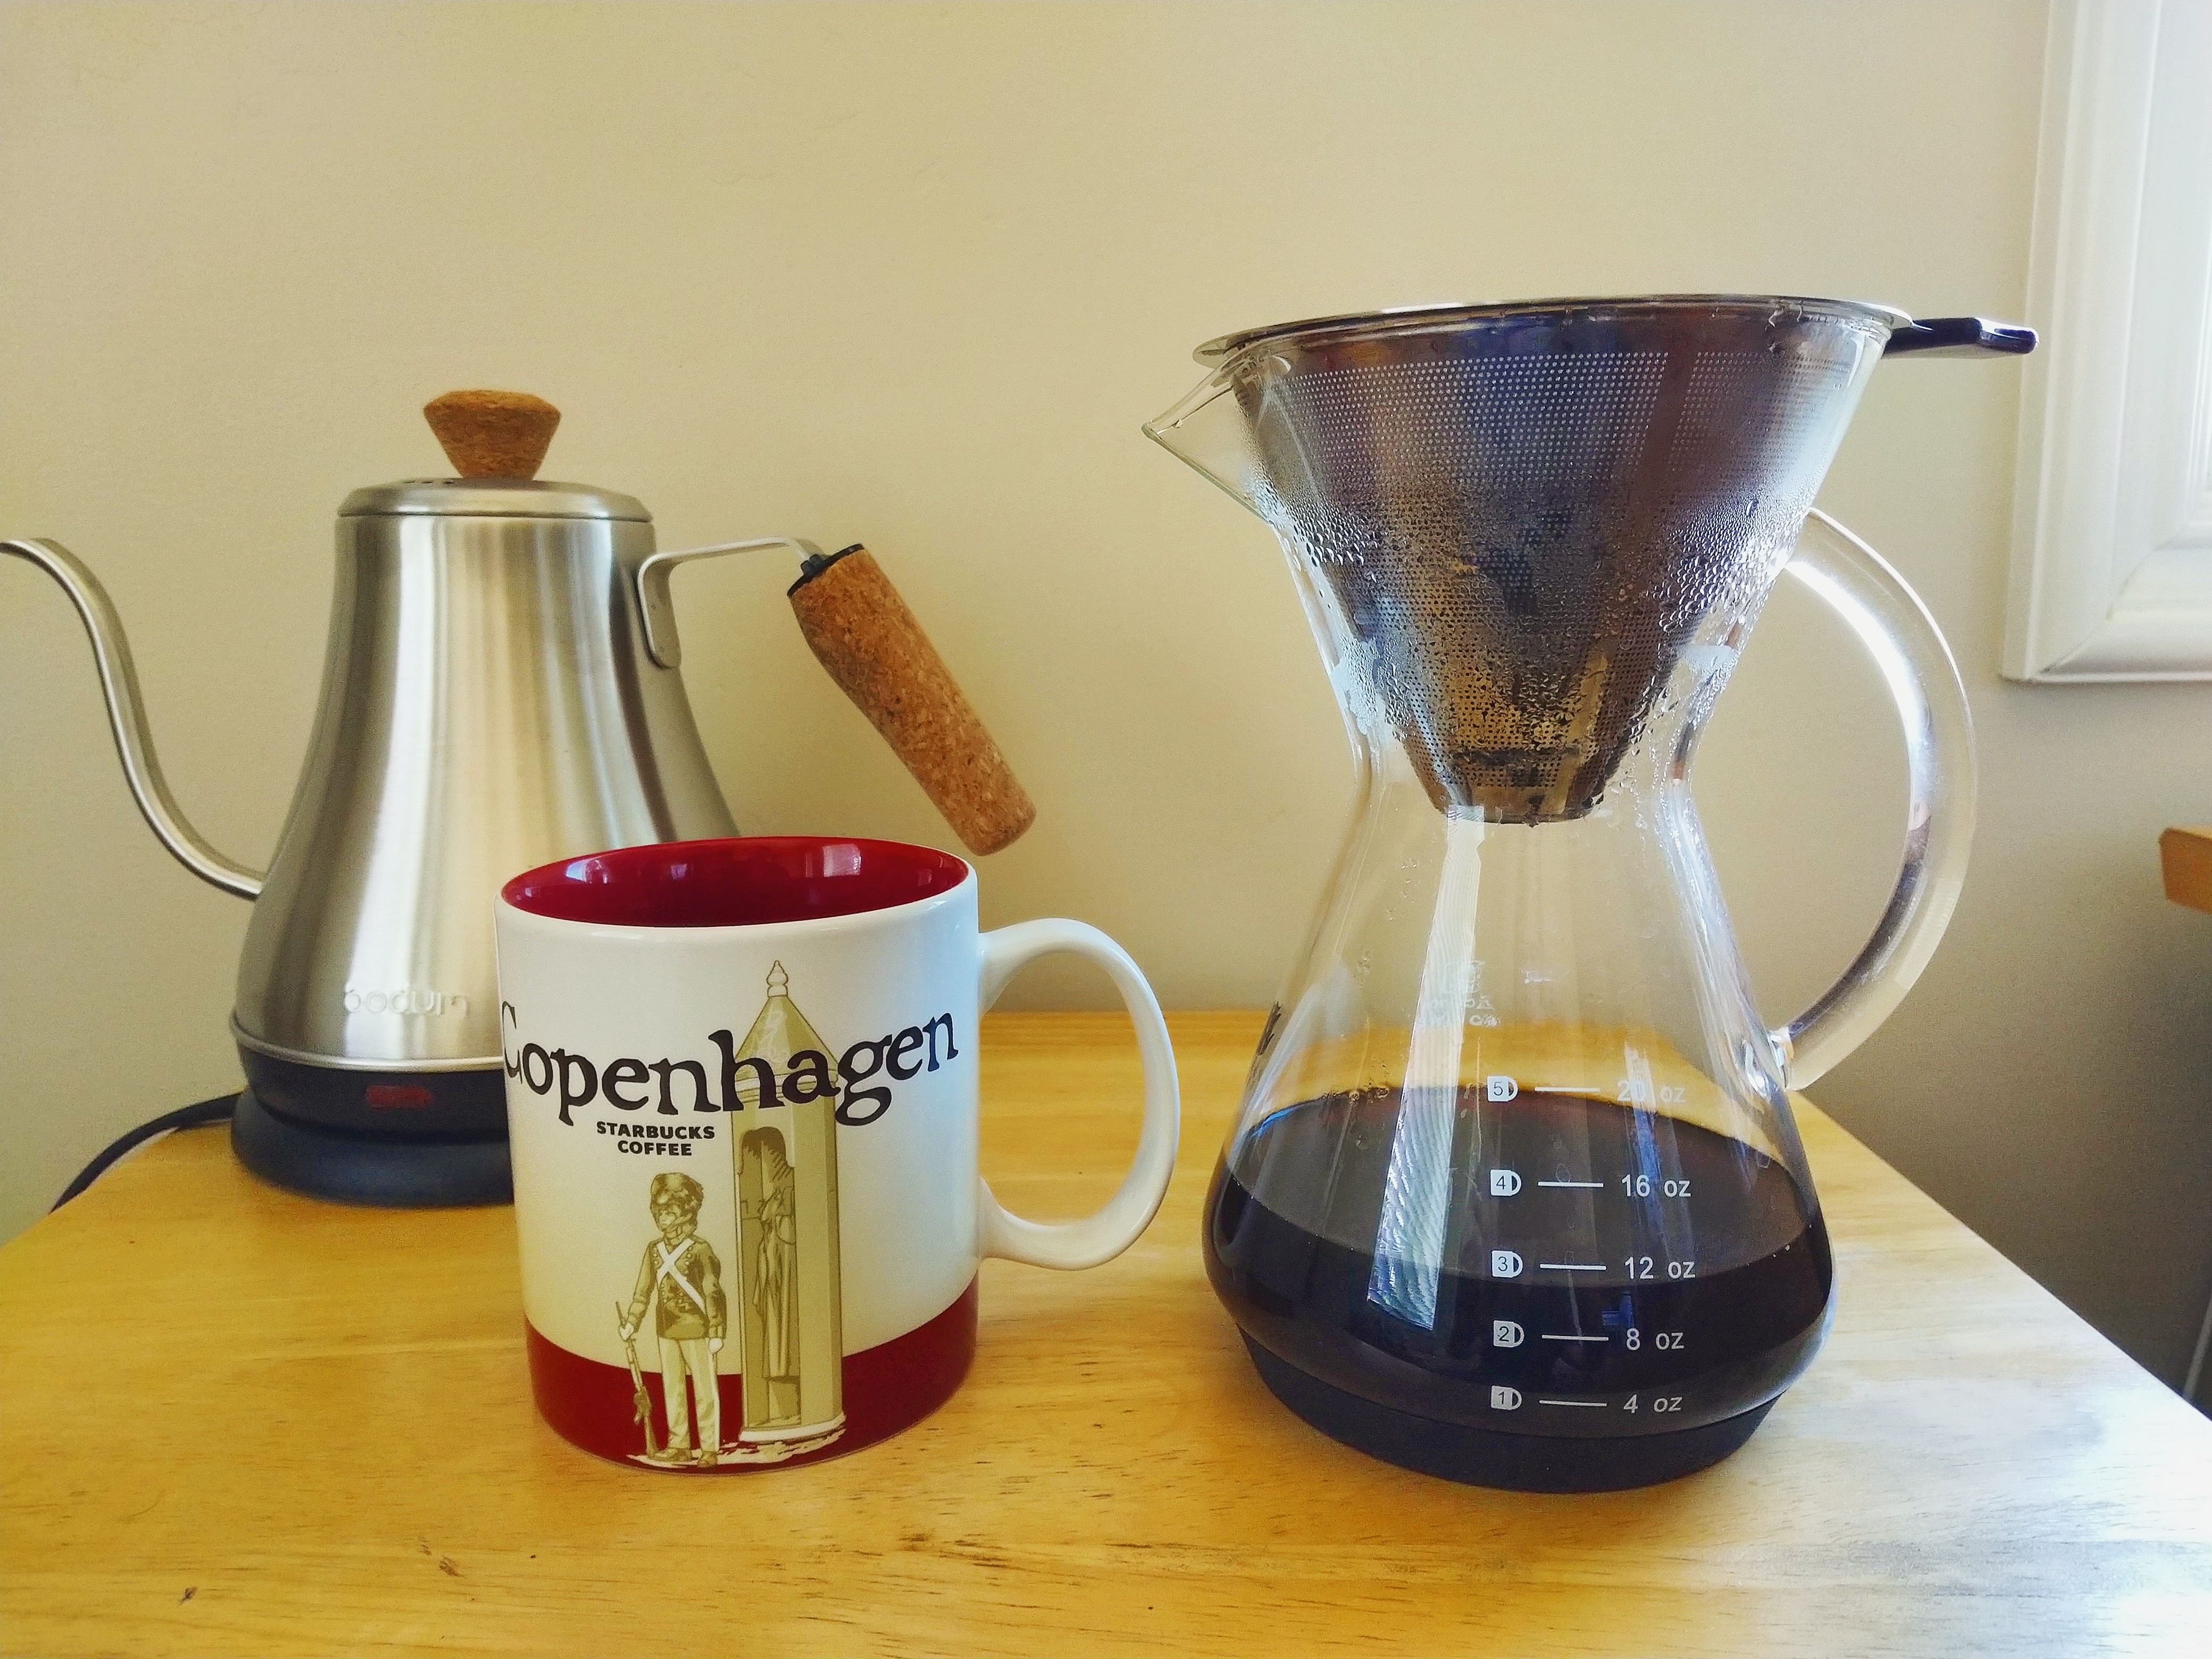 Bean Envy - An Awesome, Underrated Pour Over